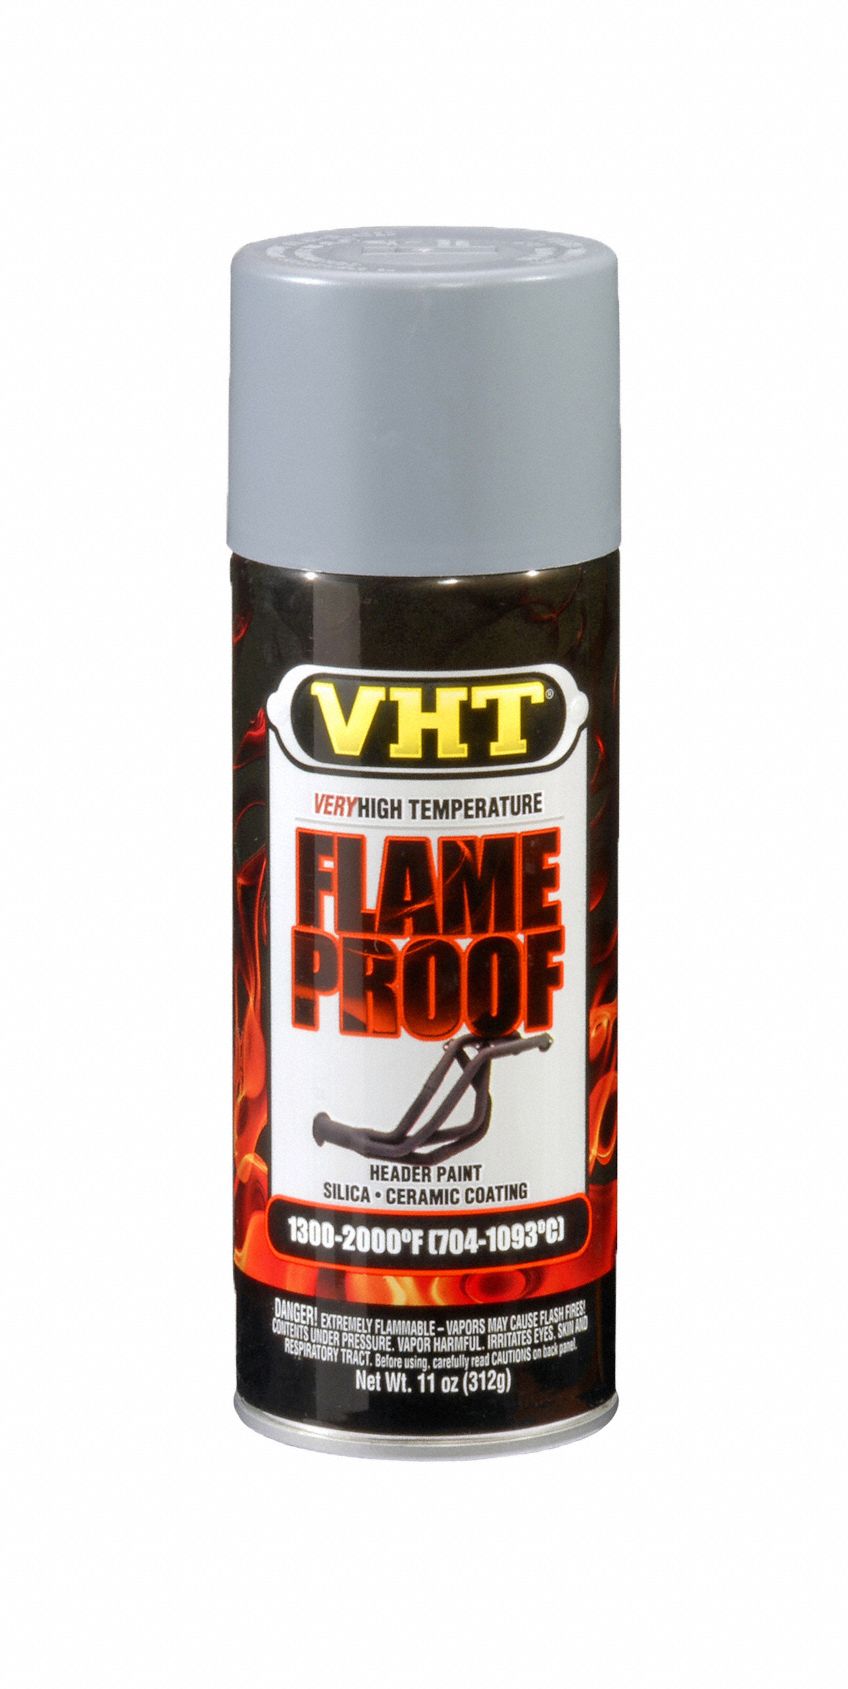 Flameproof Coating: Steel/Metal, Solvent, Gray, 11 oz Container, Flameproof